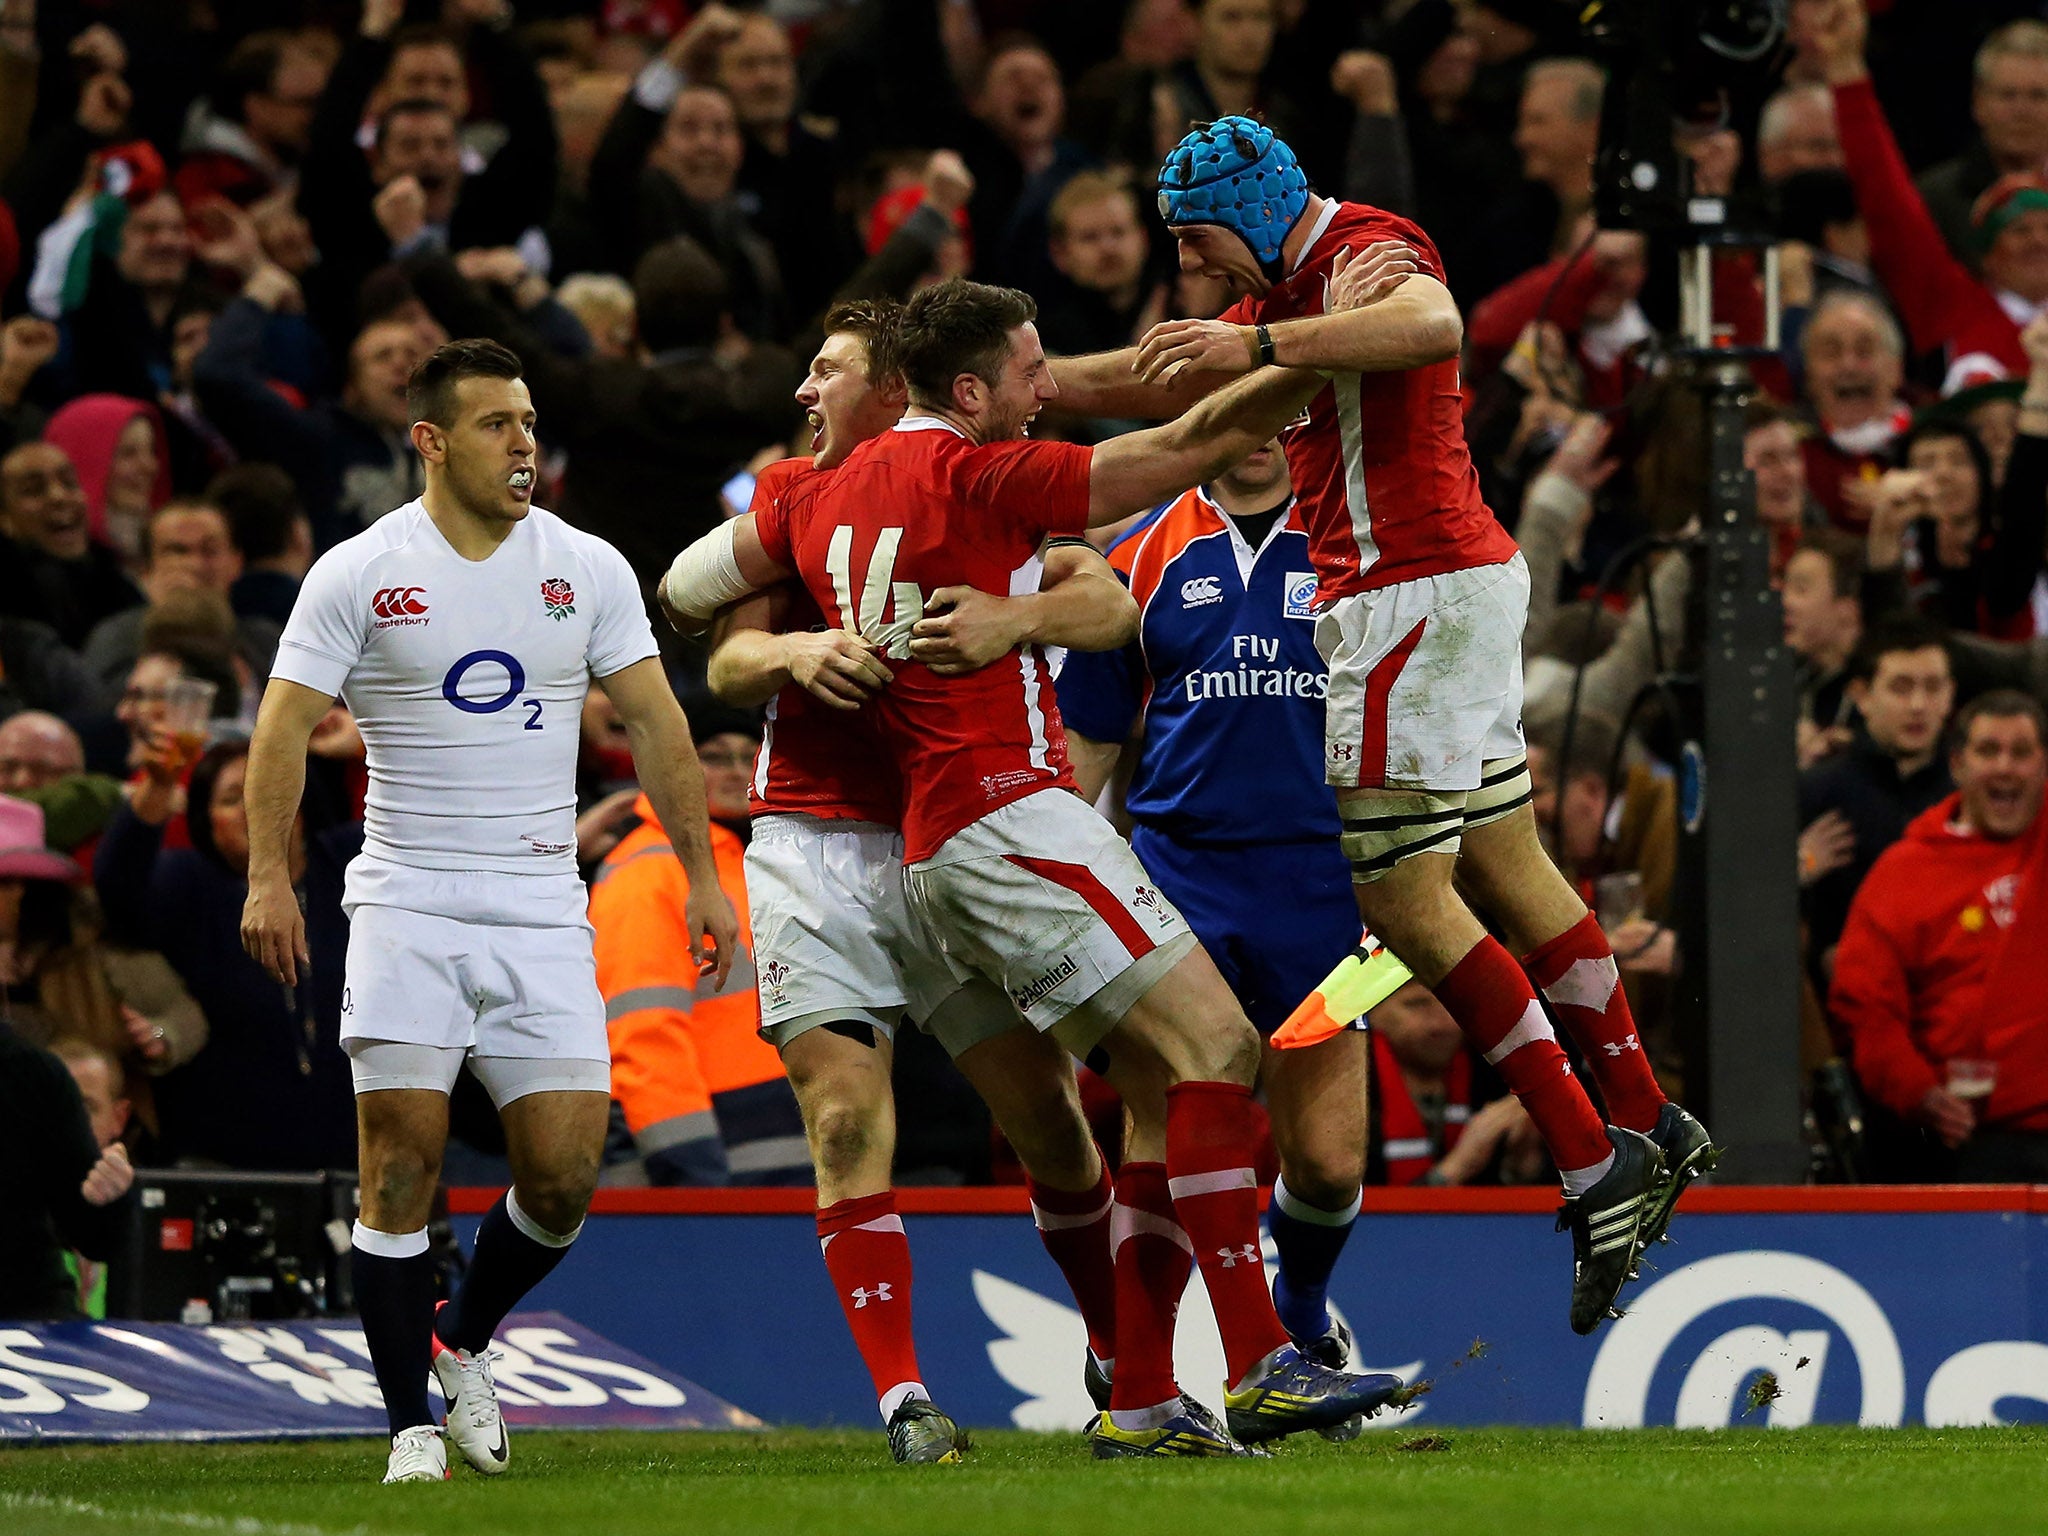 England will hope to do better than their last visit to Wales which ended in a 30-3 thumping